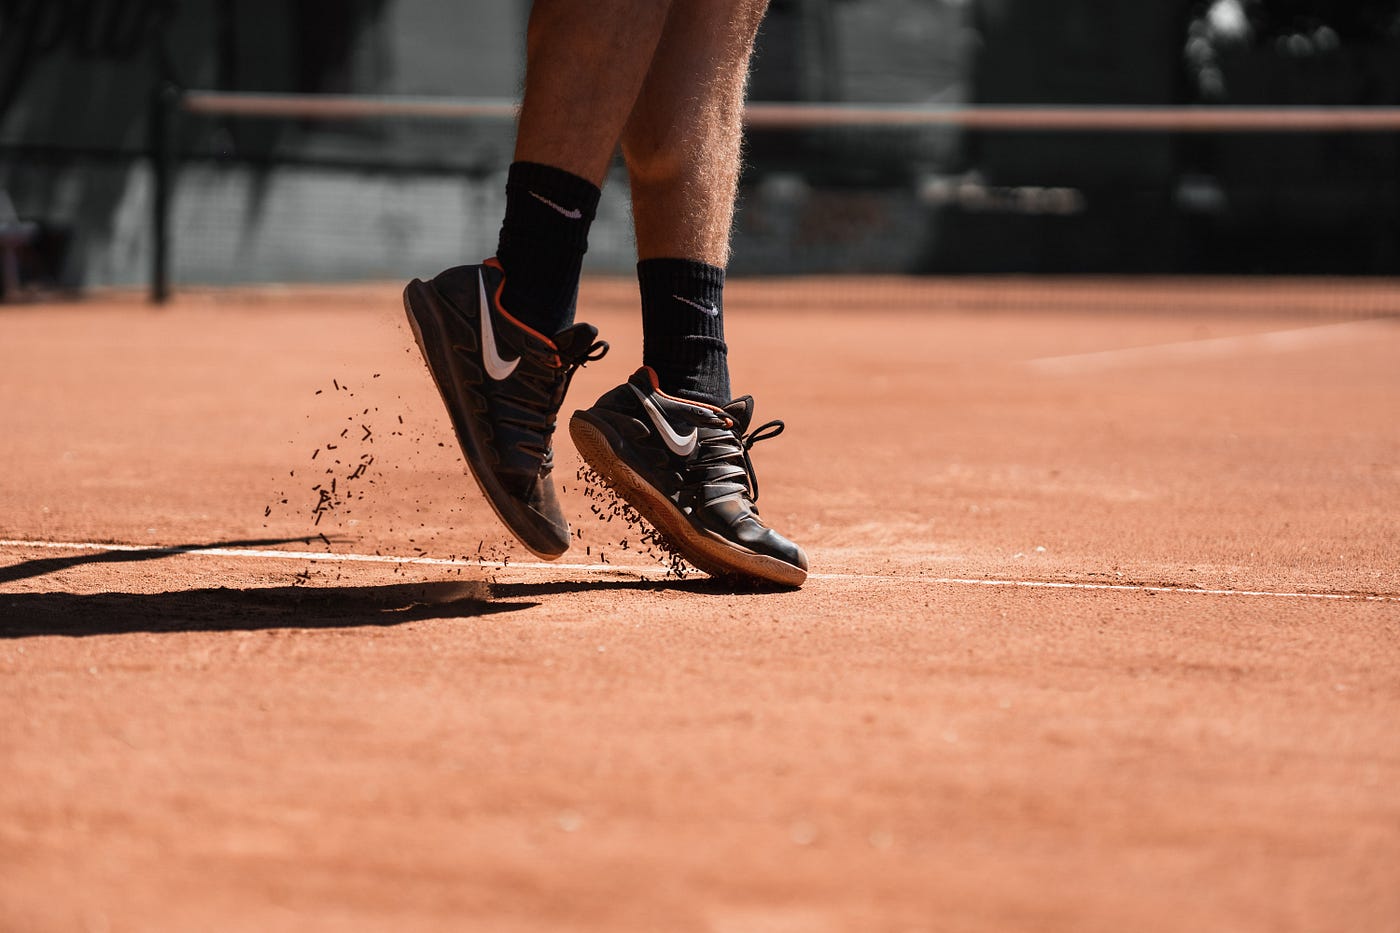 Understanding the Importance of First Serve in Tennis with Data Analysis |  by Andrea Cazzaro | Towards Data Science